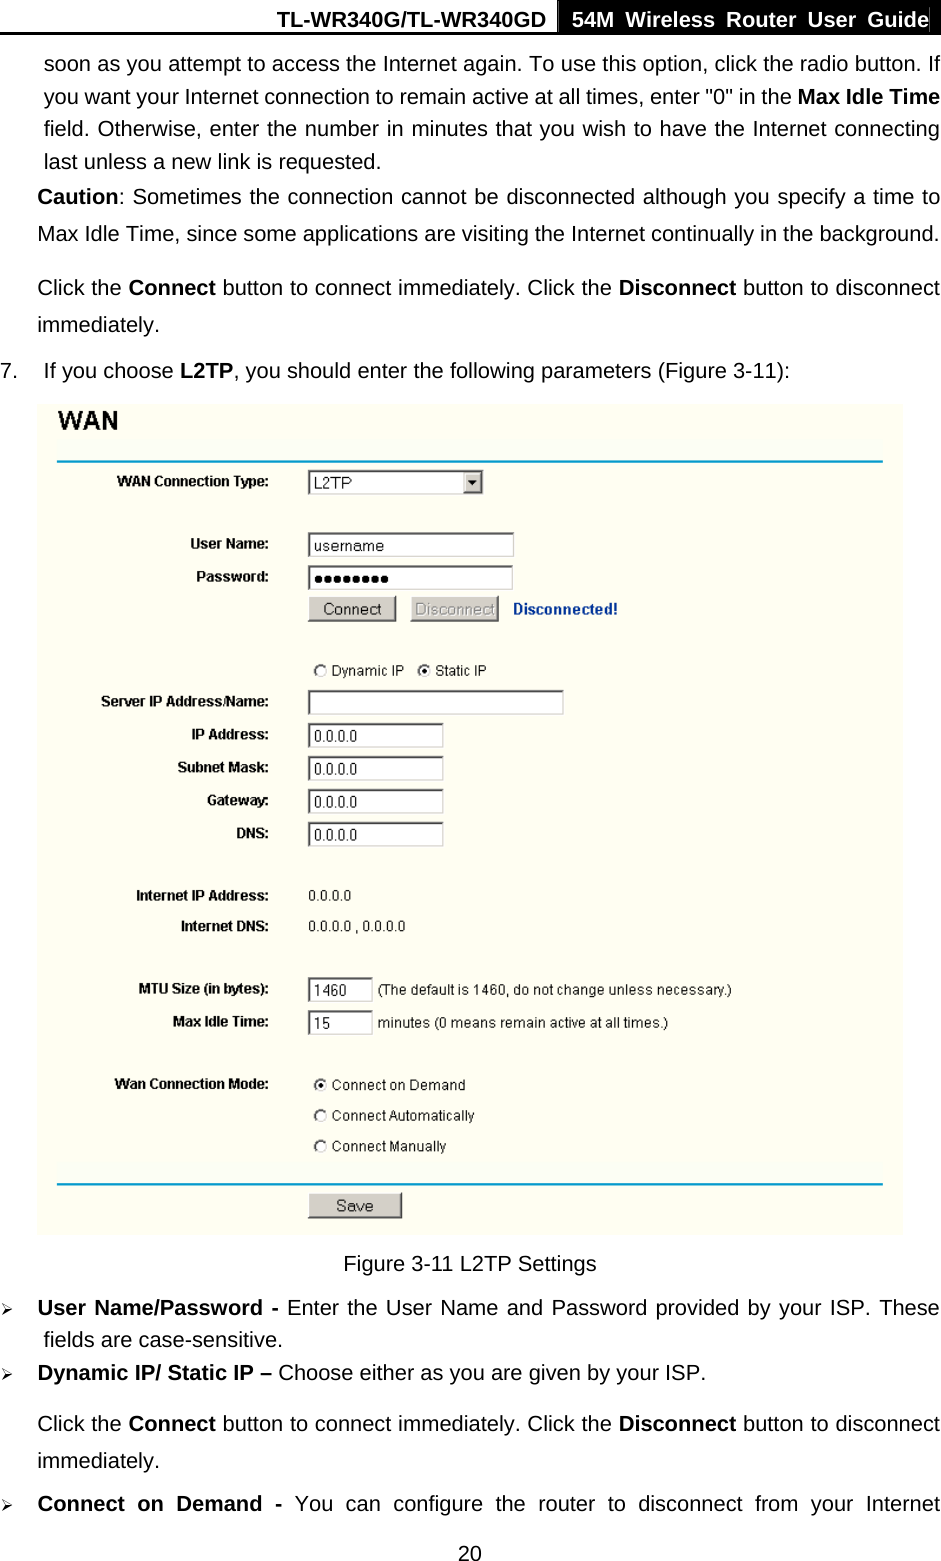 TL-WR340G/TL-WR340GD 54M Wireless Router User Guide  20soon as you attempt to access the Internet again. To use this option, click the radio button. If you want your Internet connection to remain active at all times, enter &quot;0&quot; in the Max Idle Time field. Otherwise, enter the number in minutes that you wish to have the Internet connecting last unless a new link is requested. Caution: Sometimes the connection cannot be disconnected although you specify a time to Max Idle Time, since some applications are visiting the Internet continually in the background. Click the Connect button to connect immediately. Click the Disconnect button to disconnect immediately. 7.  If you choose L2TP, you should enter the following parameters (Figure 3-11):  Figure 3-11 L2TP Settings ¾ User Name/Password - Enter the User Name and Password provided by your ISP. These fields are case-sensitive. ¾ Dynamic IP/ Static IP – Choose either as you are given by your ISP. Click the Connect button to connect immediately. Click the Disconnect button to disconnect immediately. ¾ Connect on Demand - You can configure the router to disconnect from your Internet 